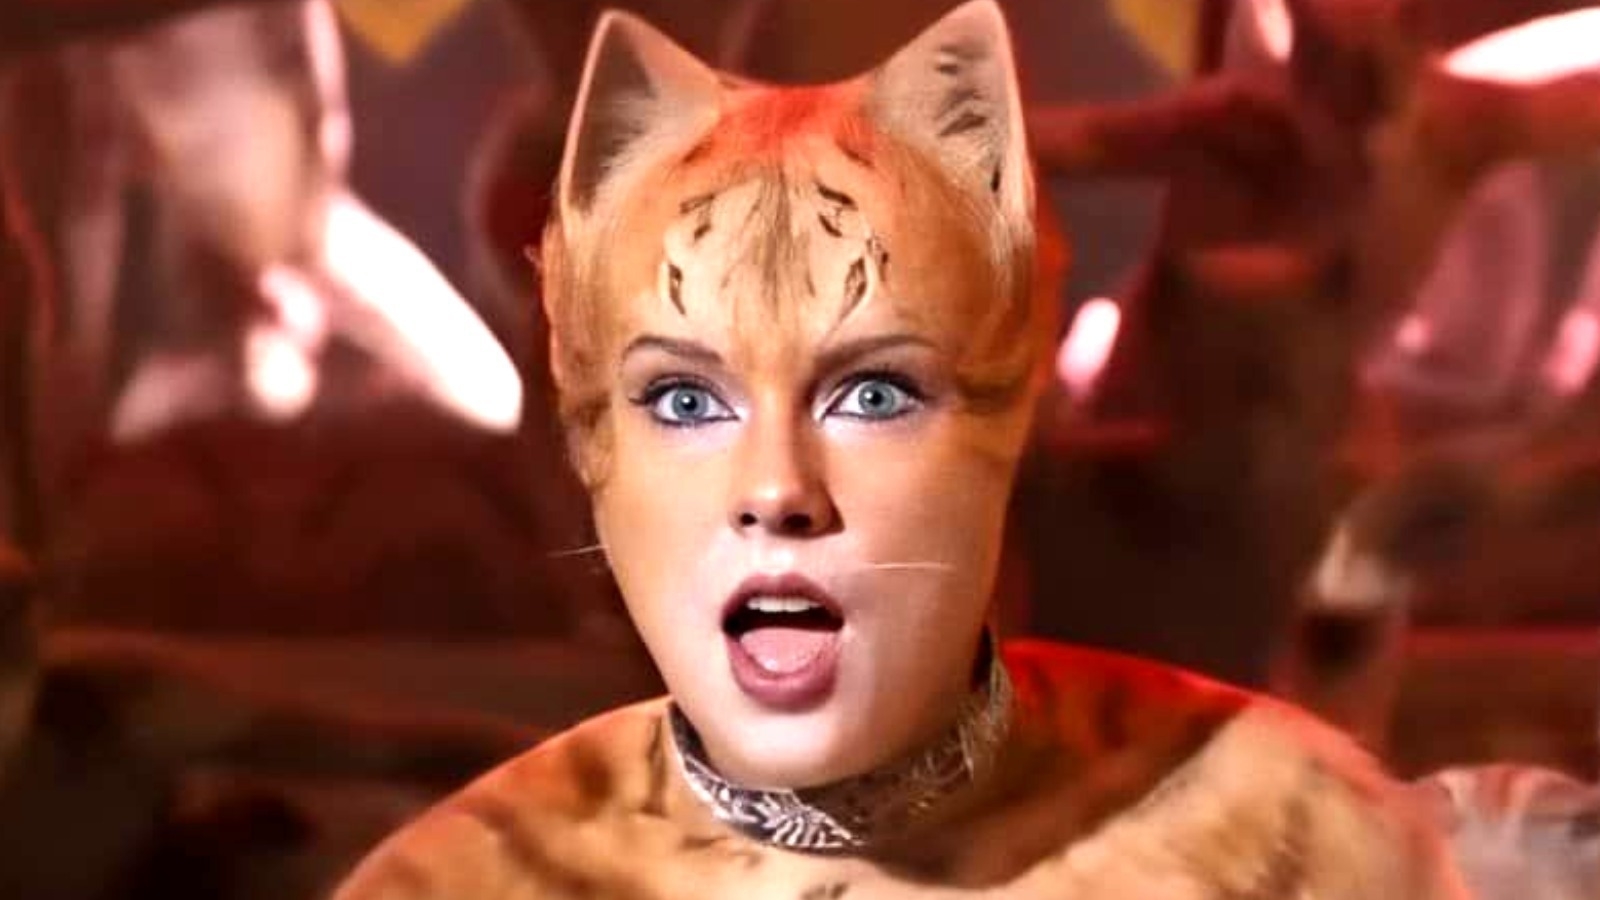 Taylor Swift in &quot;Cats&quot; film, dressed as a cat with digital fur, wide-eyed expression